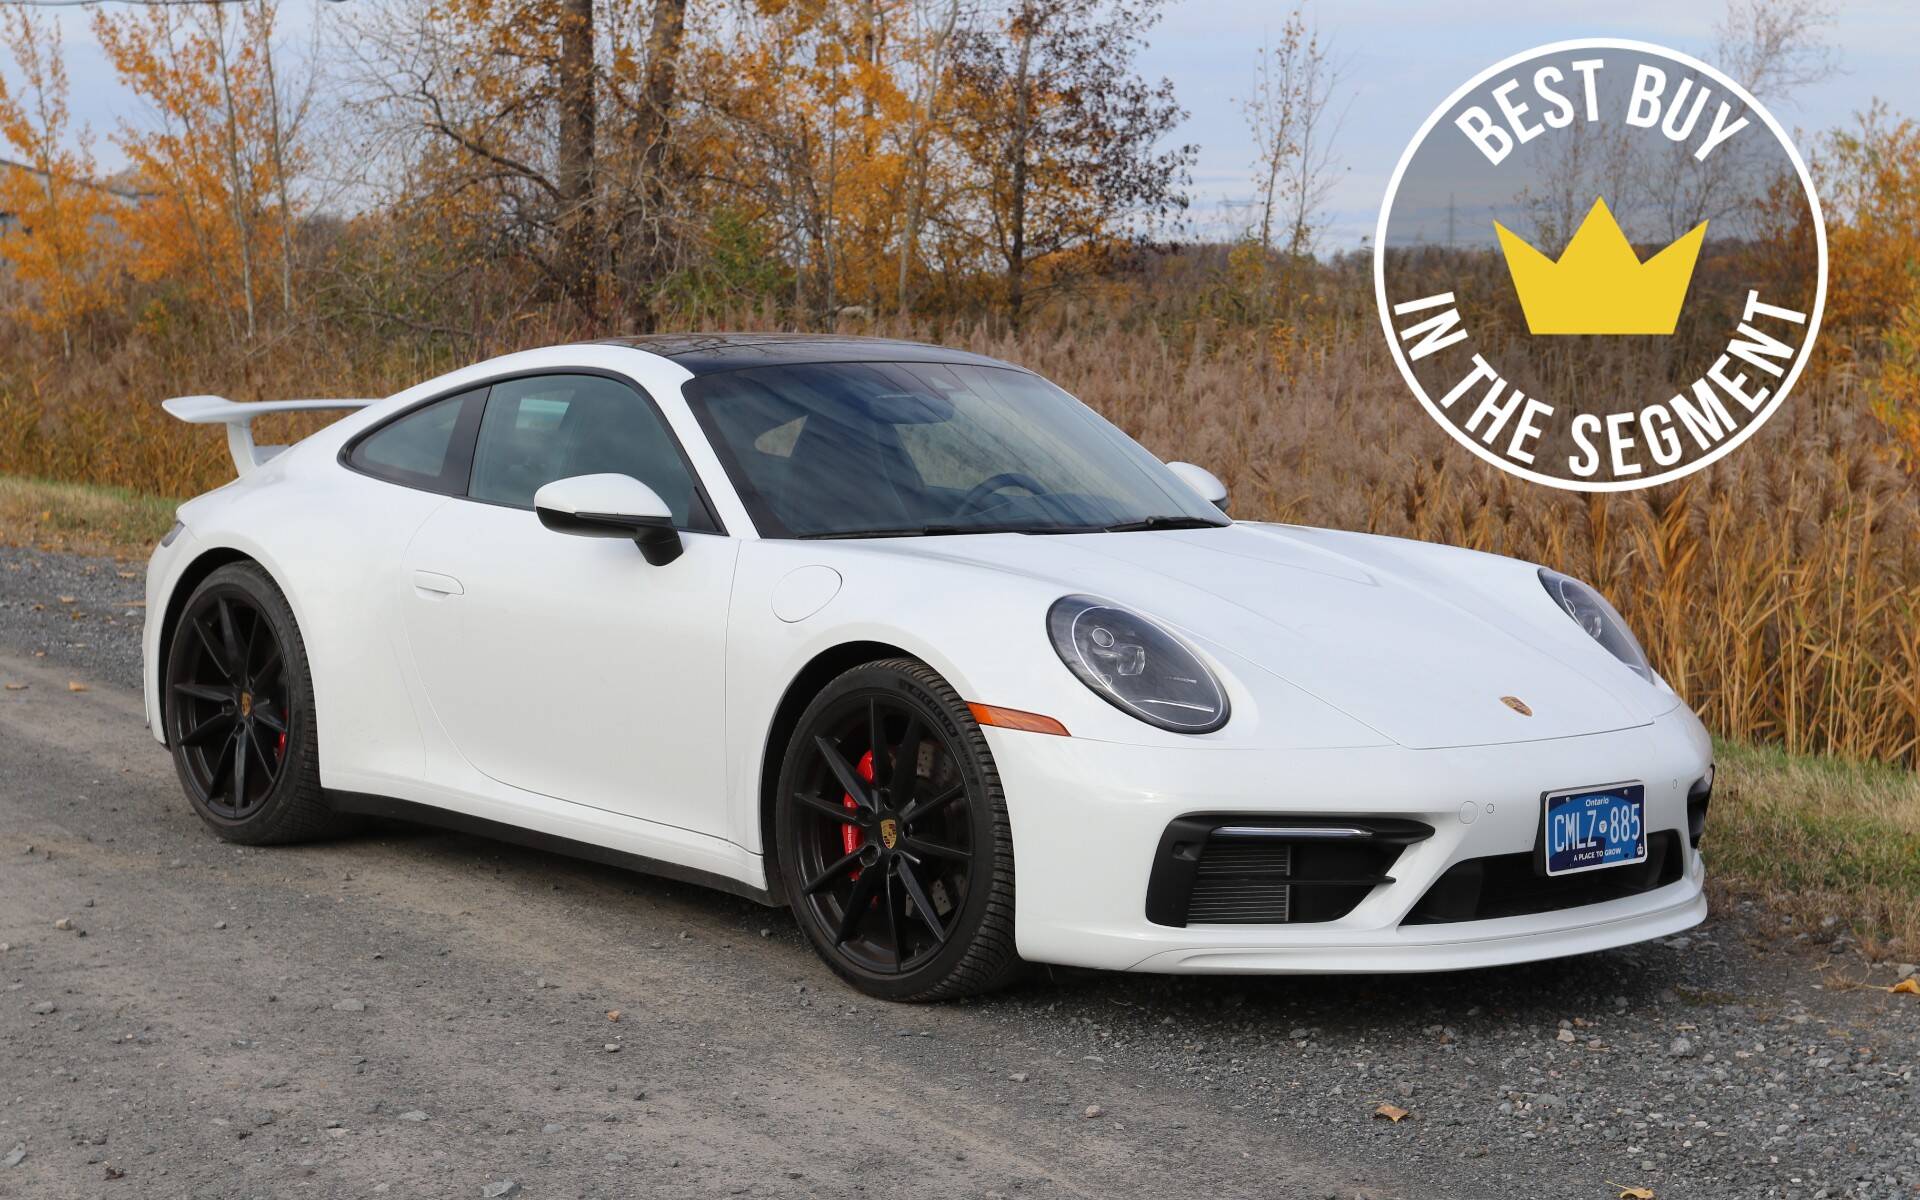 The Complete Porsche Buying Guide: Every Model, Explained